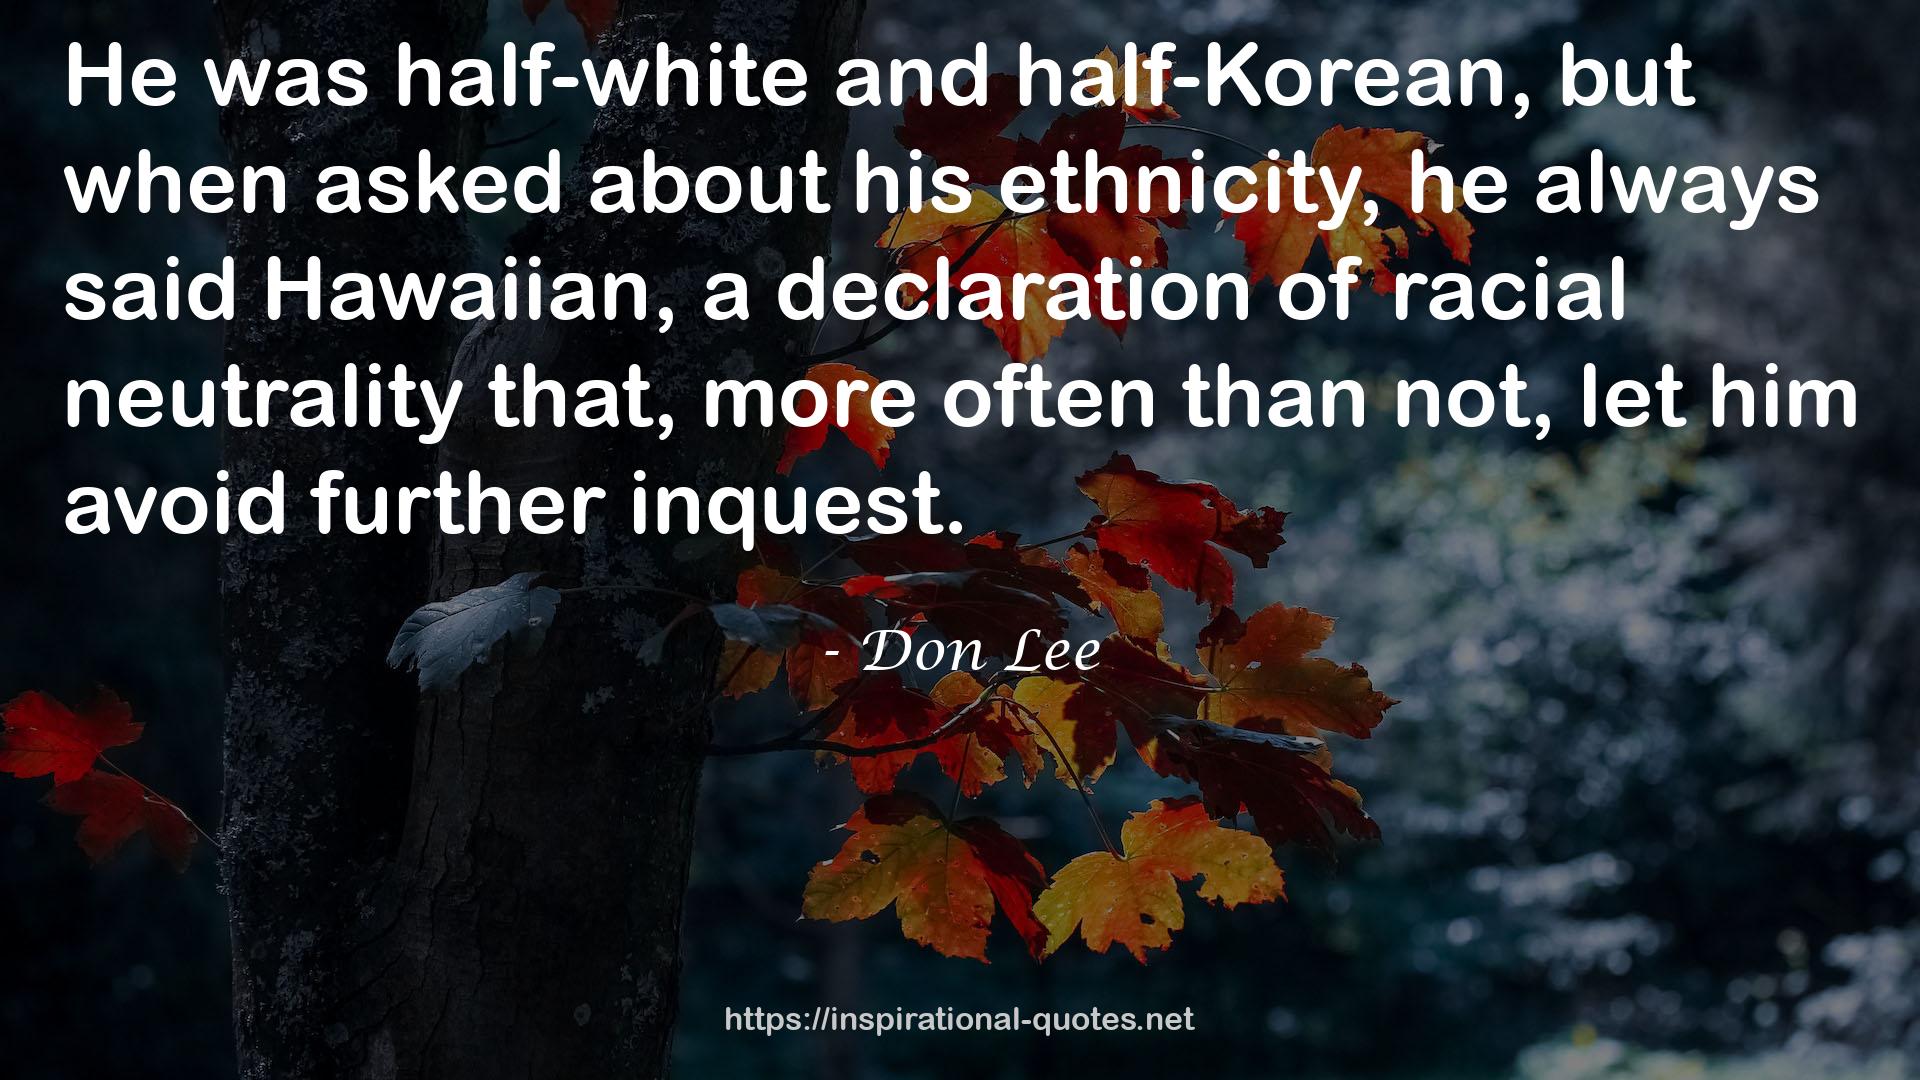 Don Lee QUOTES